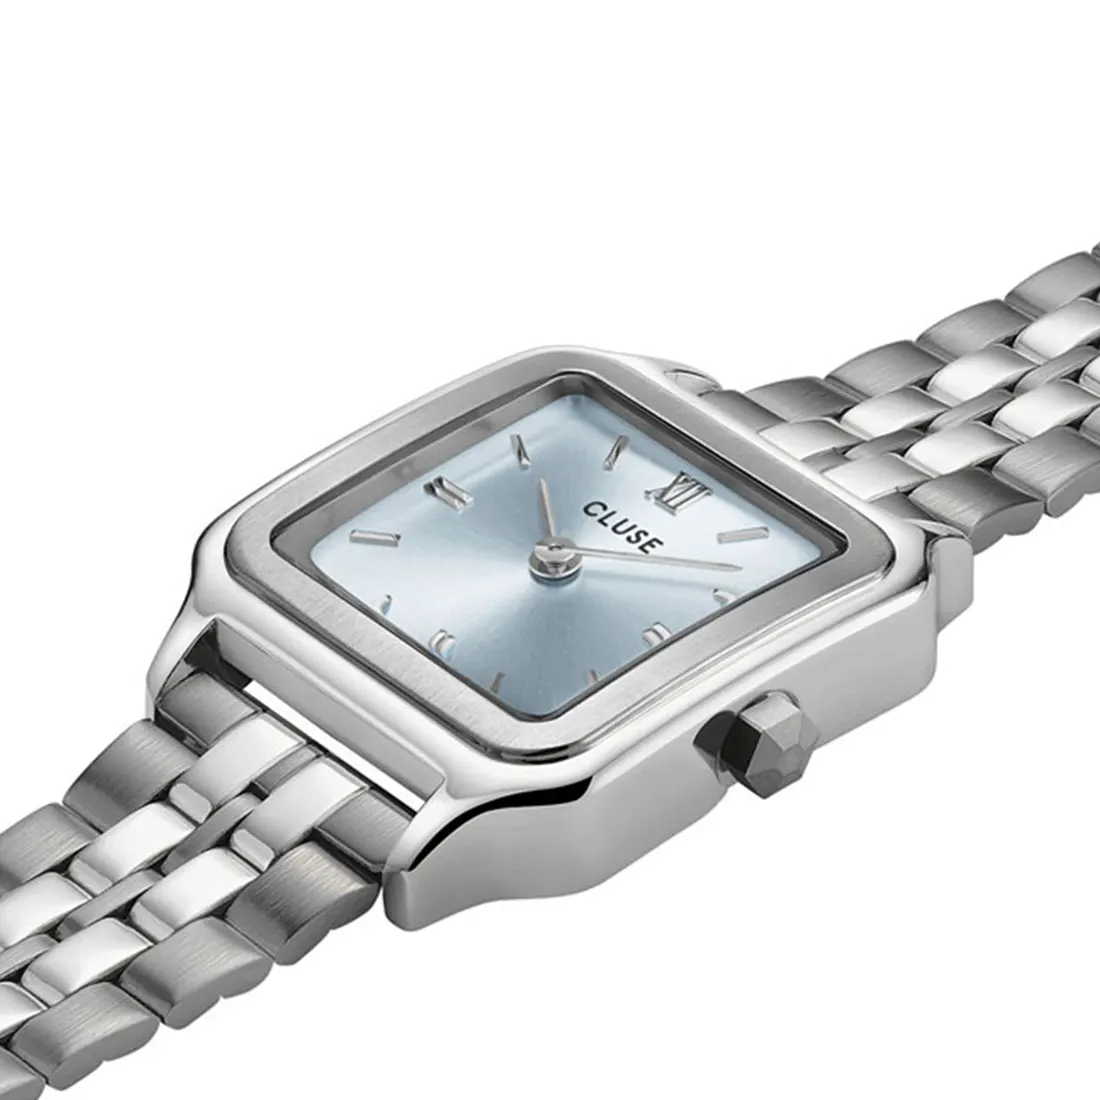 CLUSE Gracieuse Petite Stainless Steel Bracelet CW11806